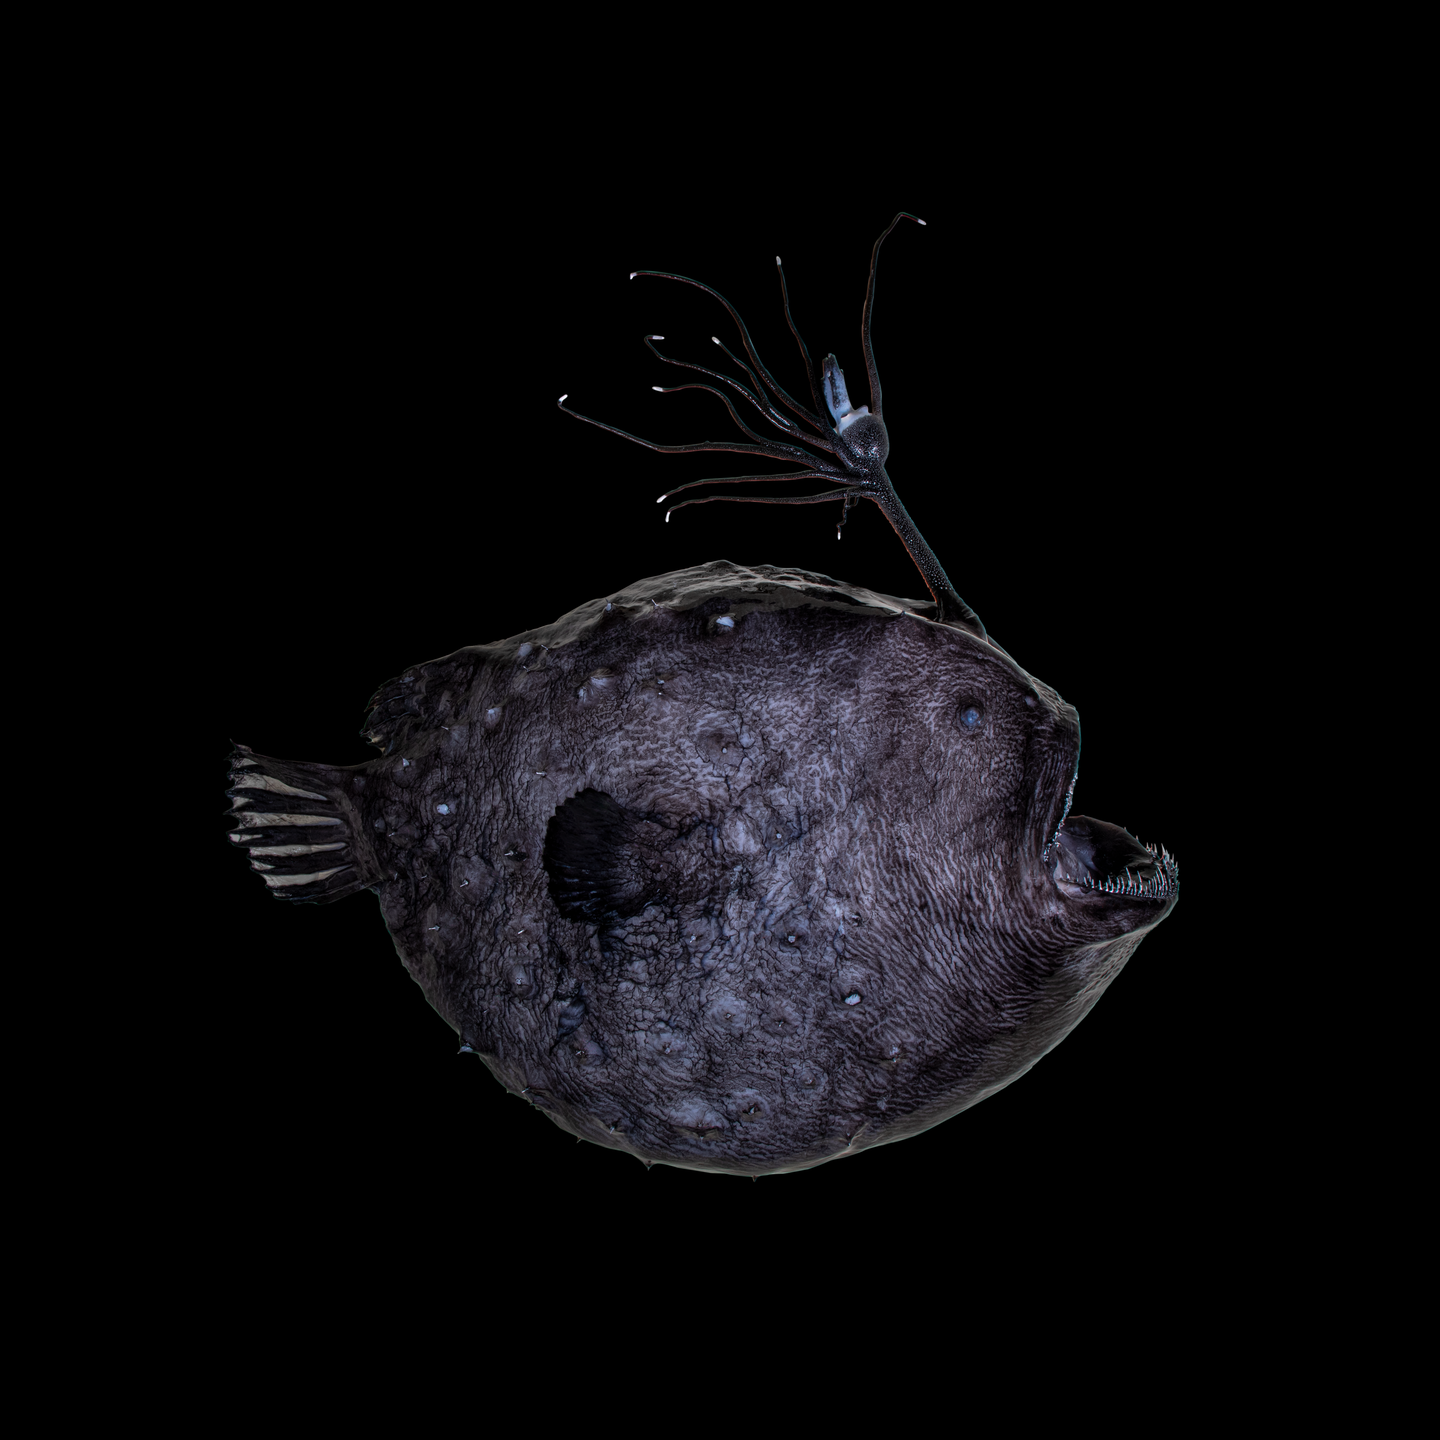 a large, dark globe-shaped fish with a striking rod on the crown of its head. the bulb at the tip of the rod glows a cobalt blue